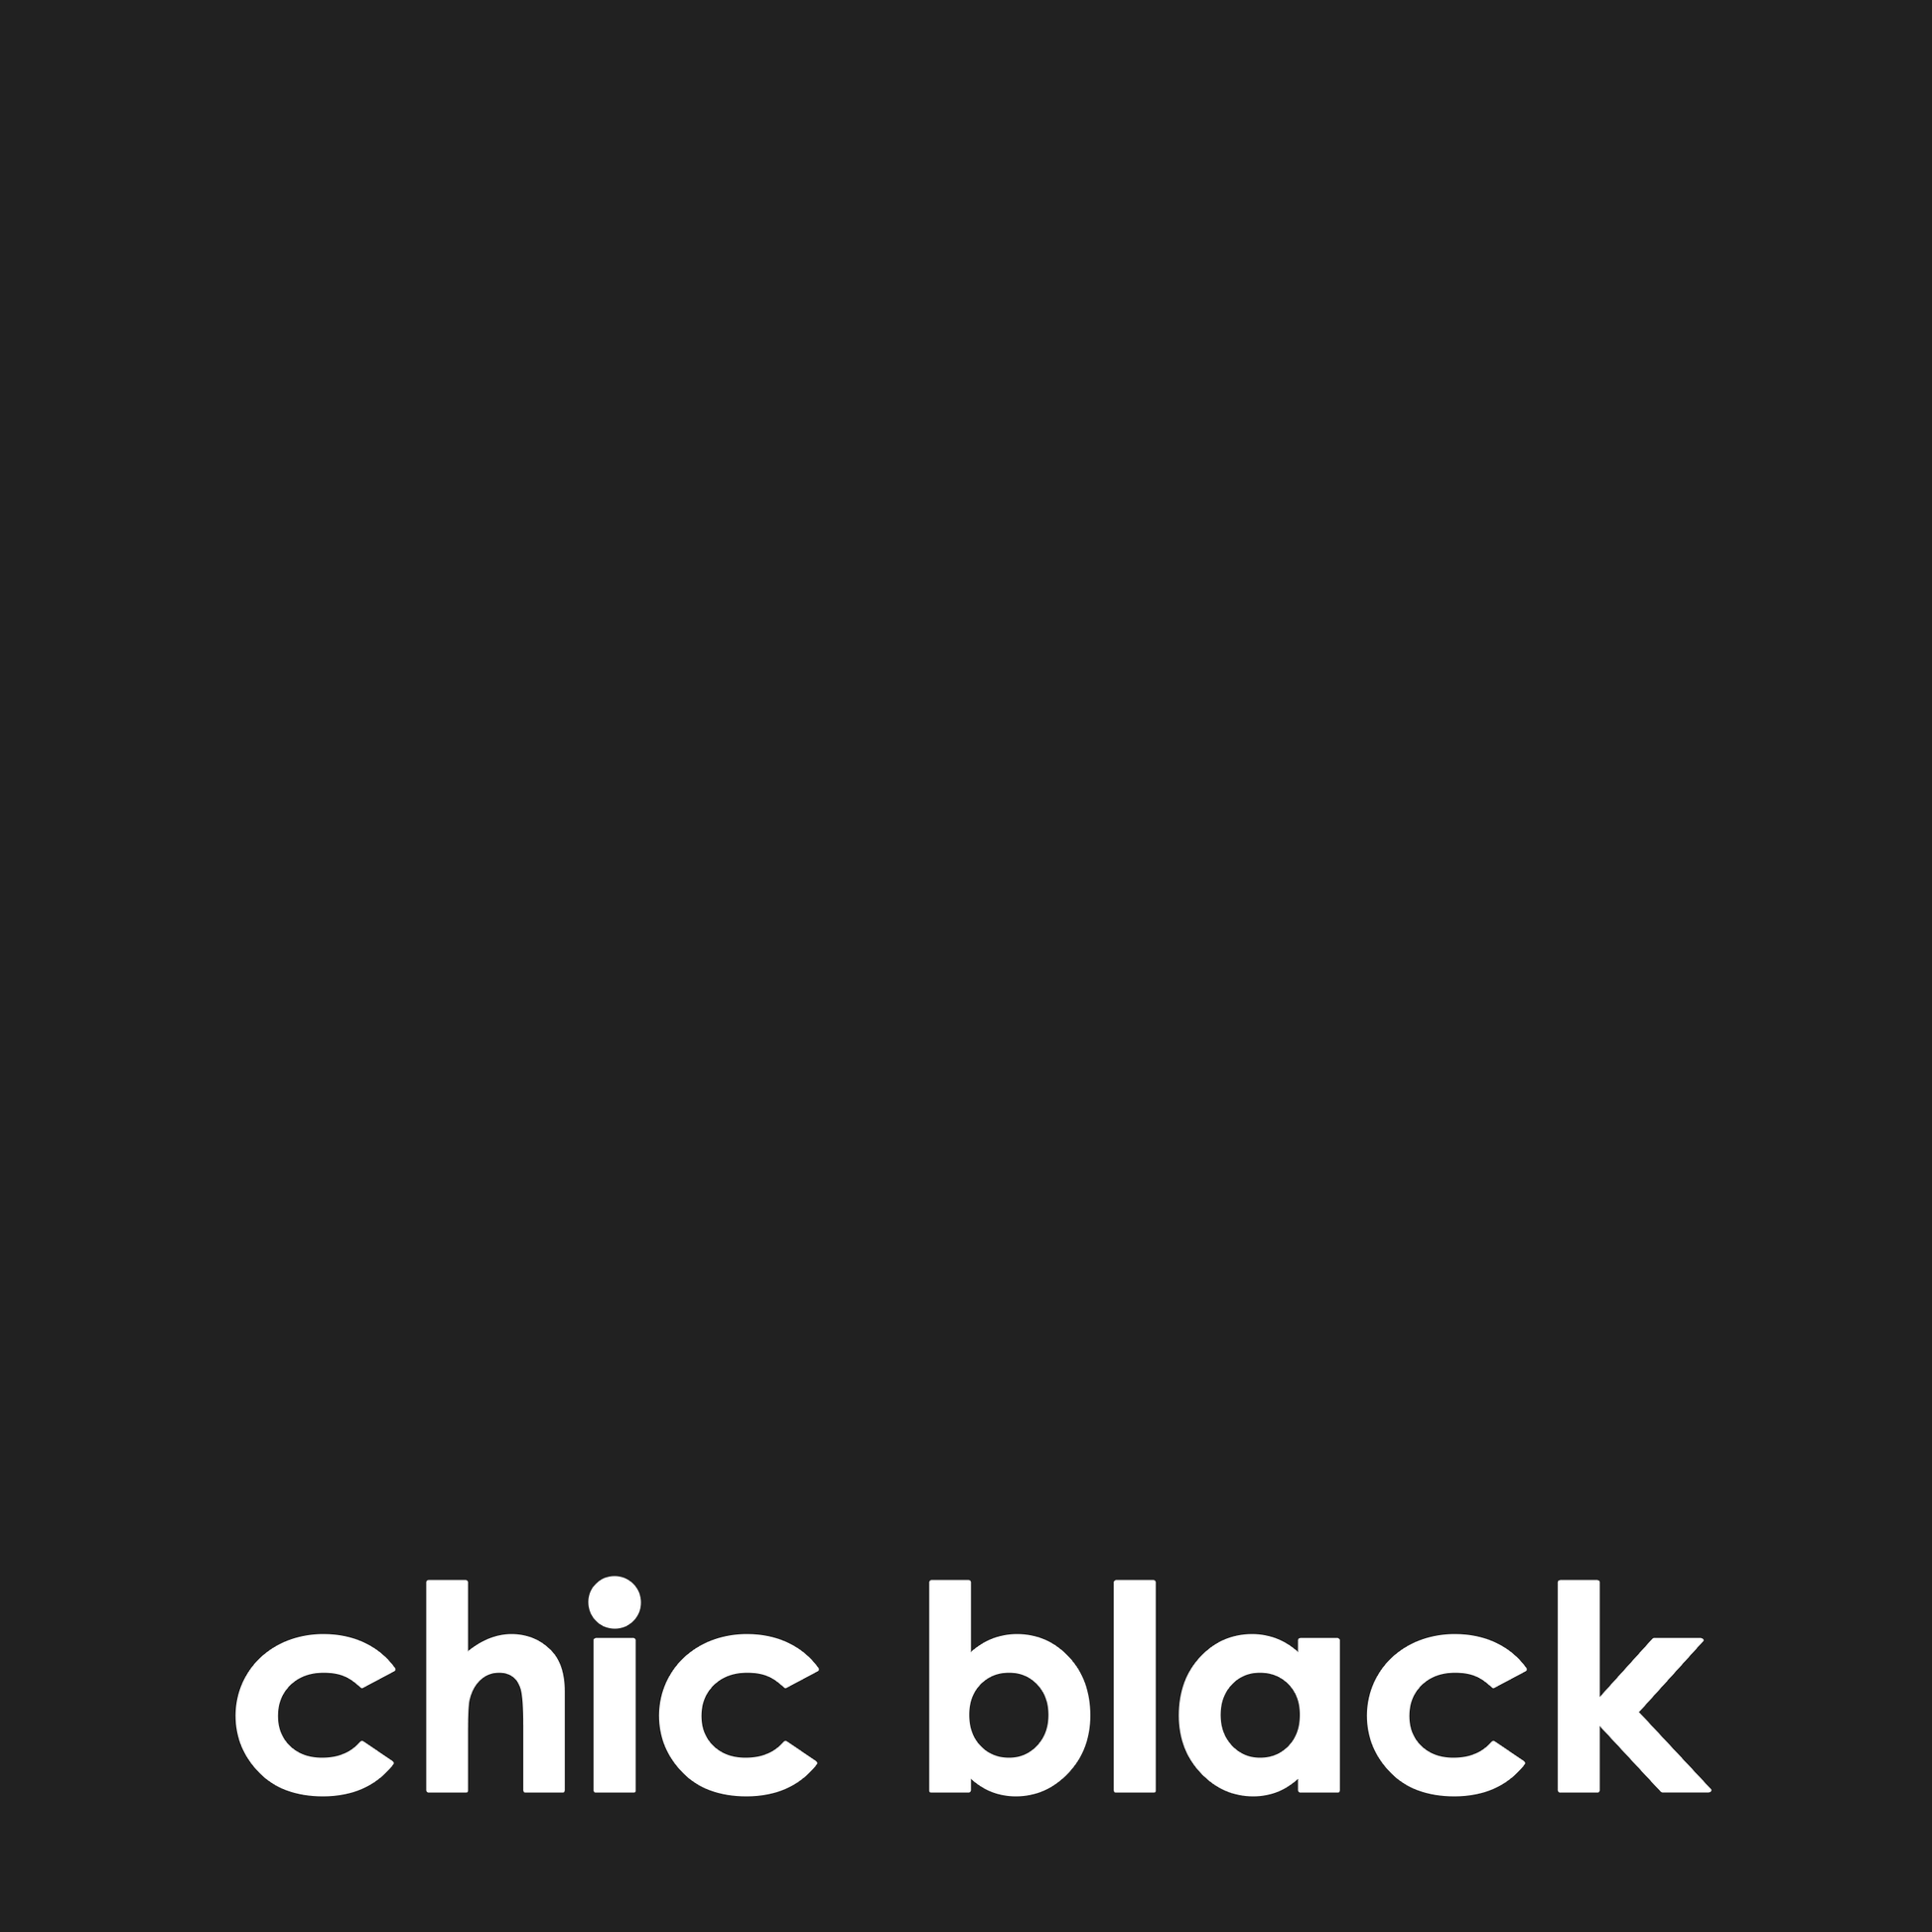 Black background with white text that reads "chic black".